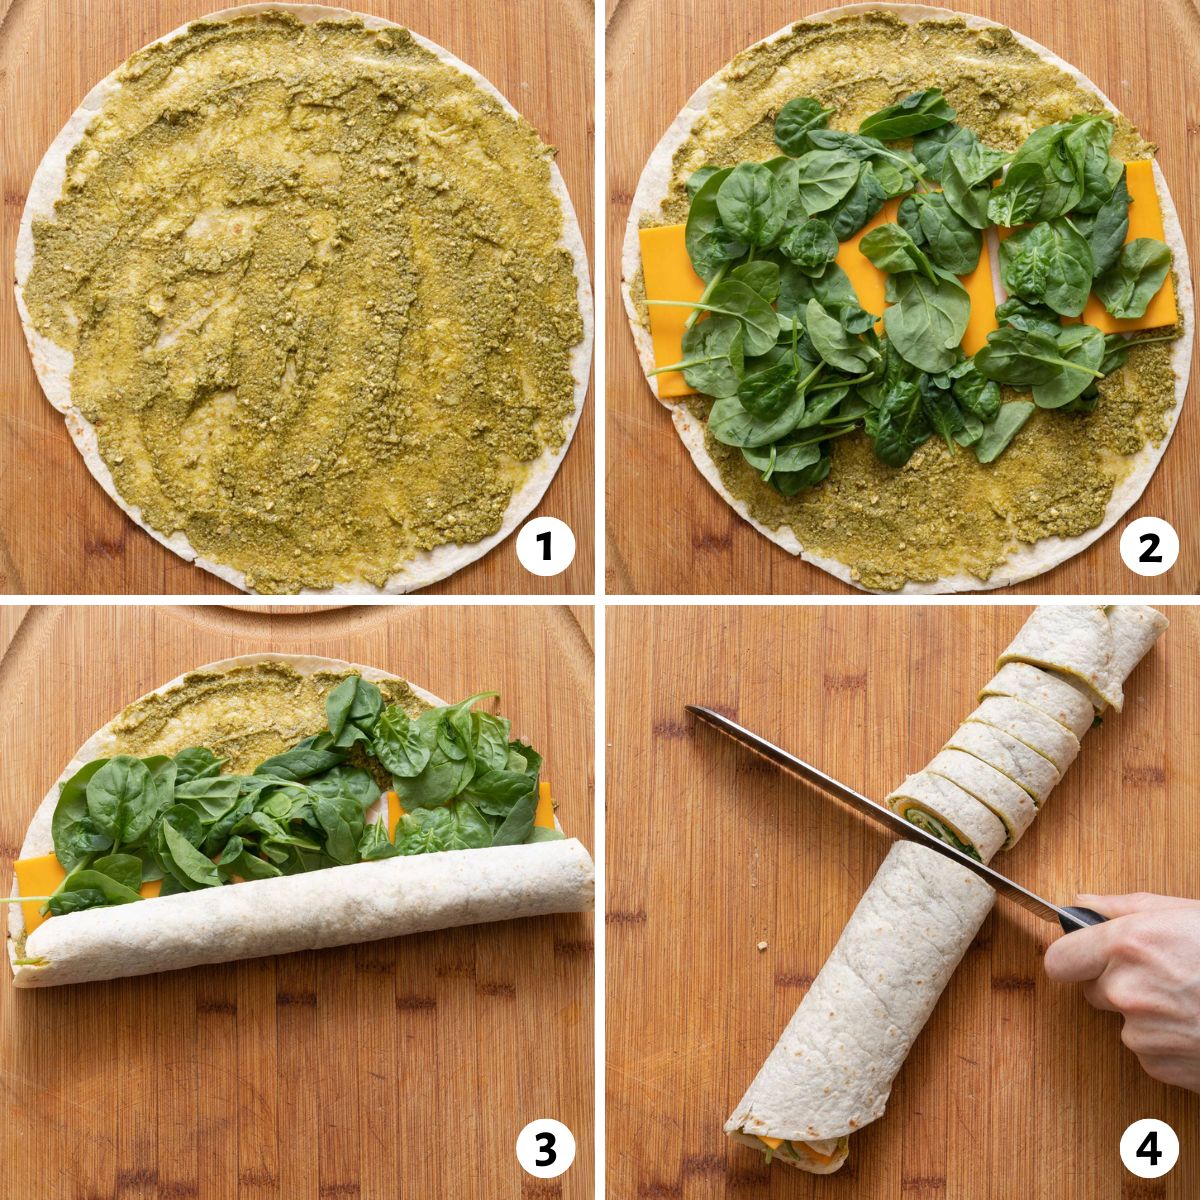 4 image collage on how to make a pinwheel sandwich recipe: spread pesto, add spinach and cheese, roll tortilla shell, slice into thin rings.